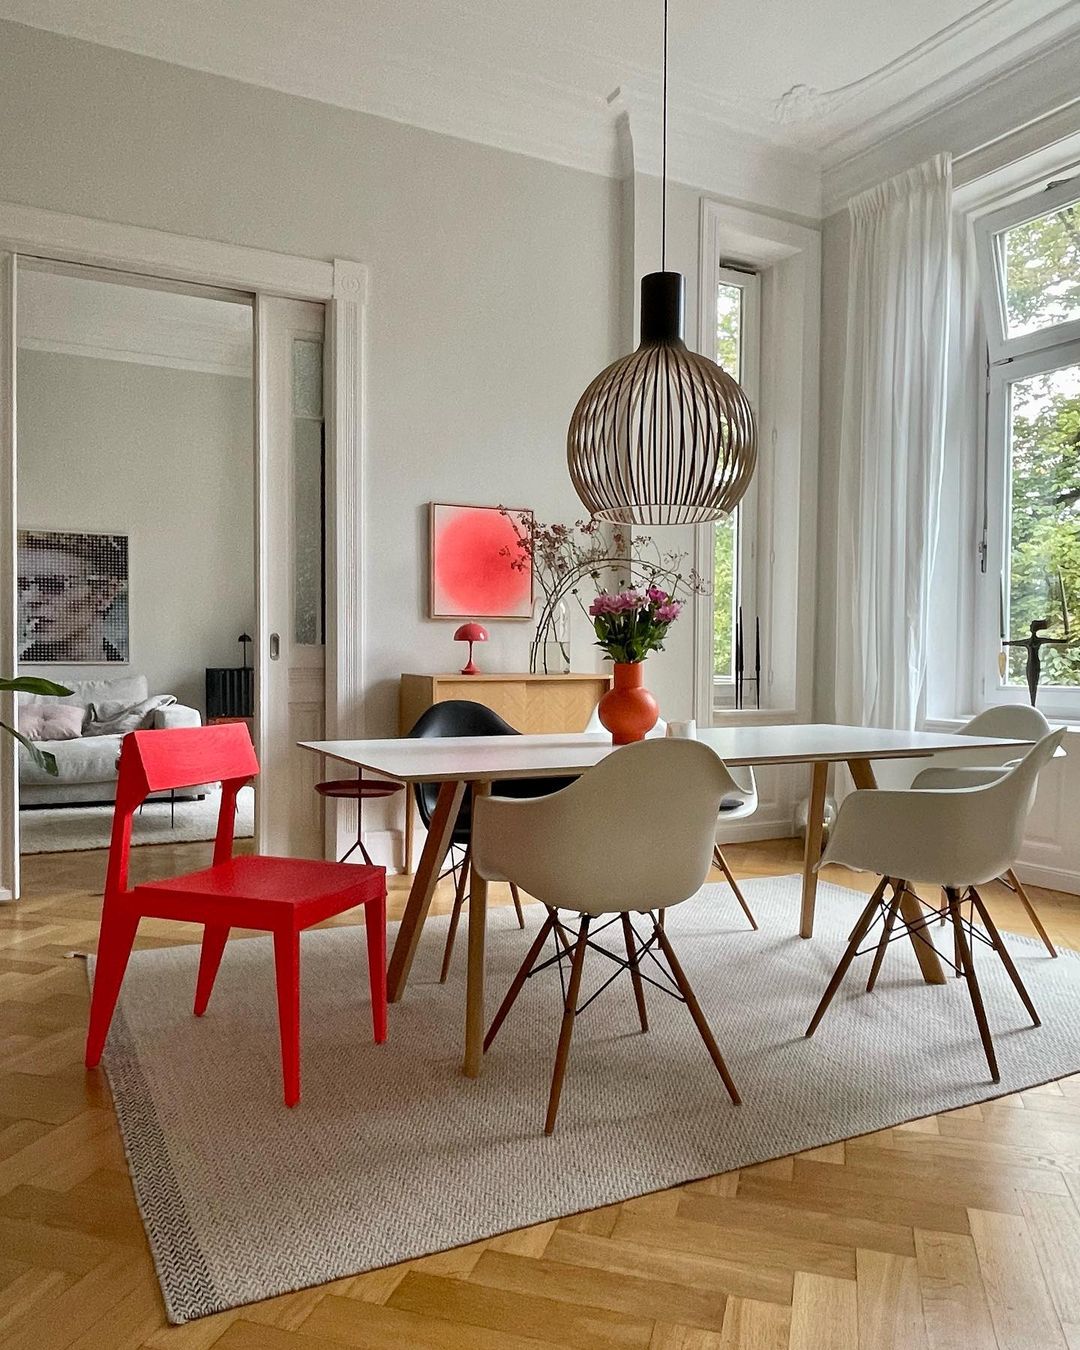 A red chair in a neutral dining room